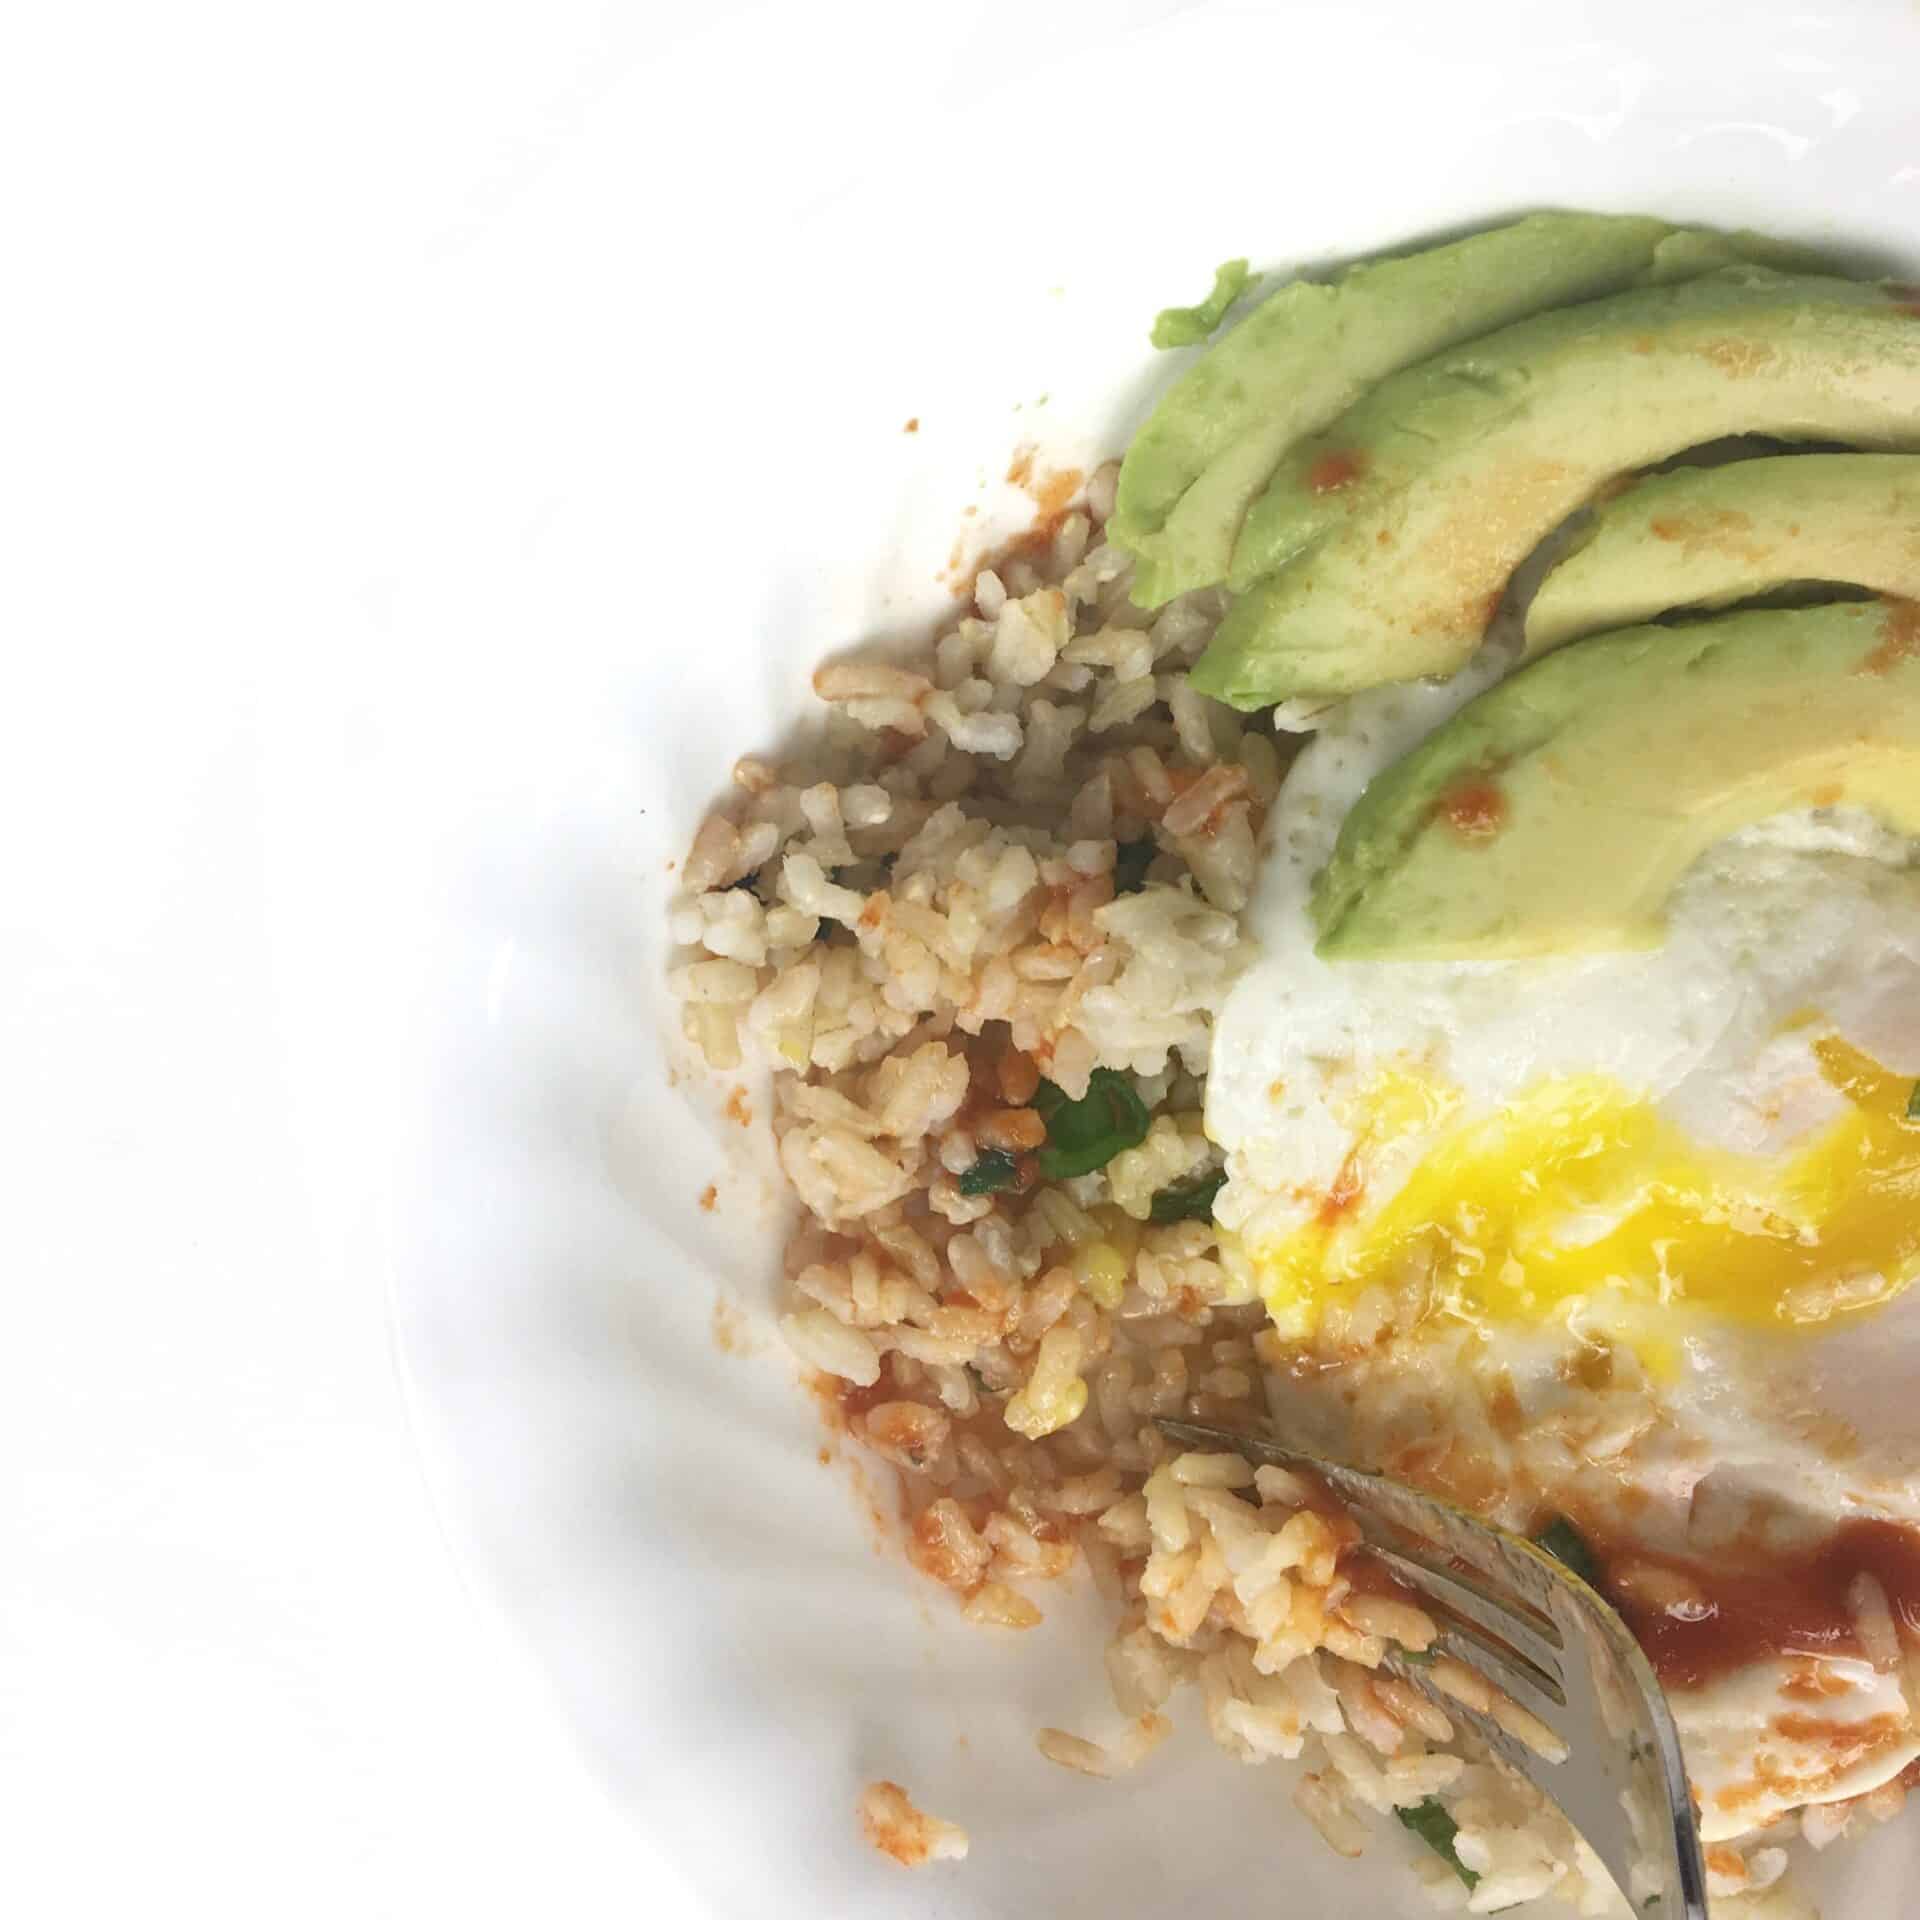 Recipe Review – Rice Bowl with Fried Egg and Avocado